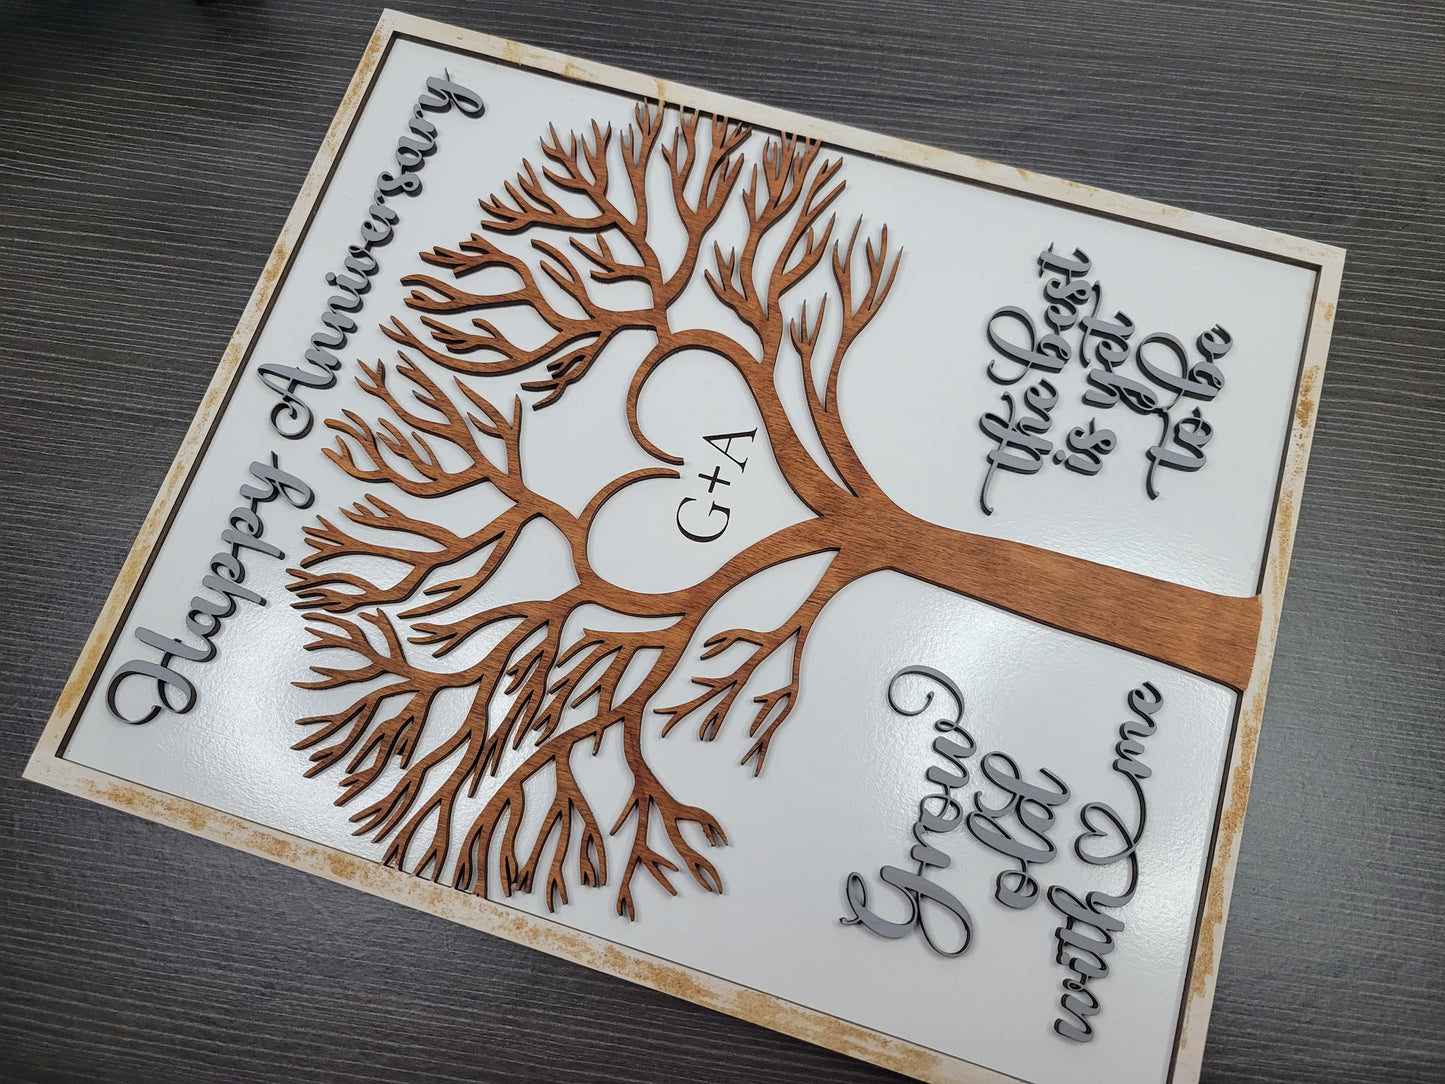 Happy Anniversary Tree Grow Old with Me SVG Laser Ready File